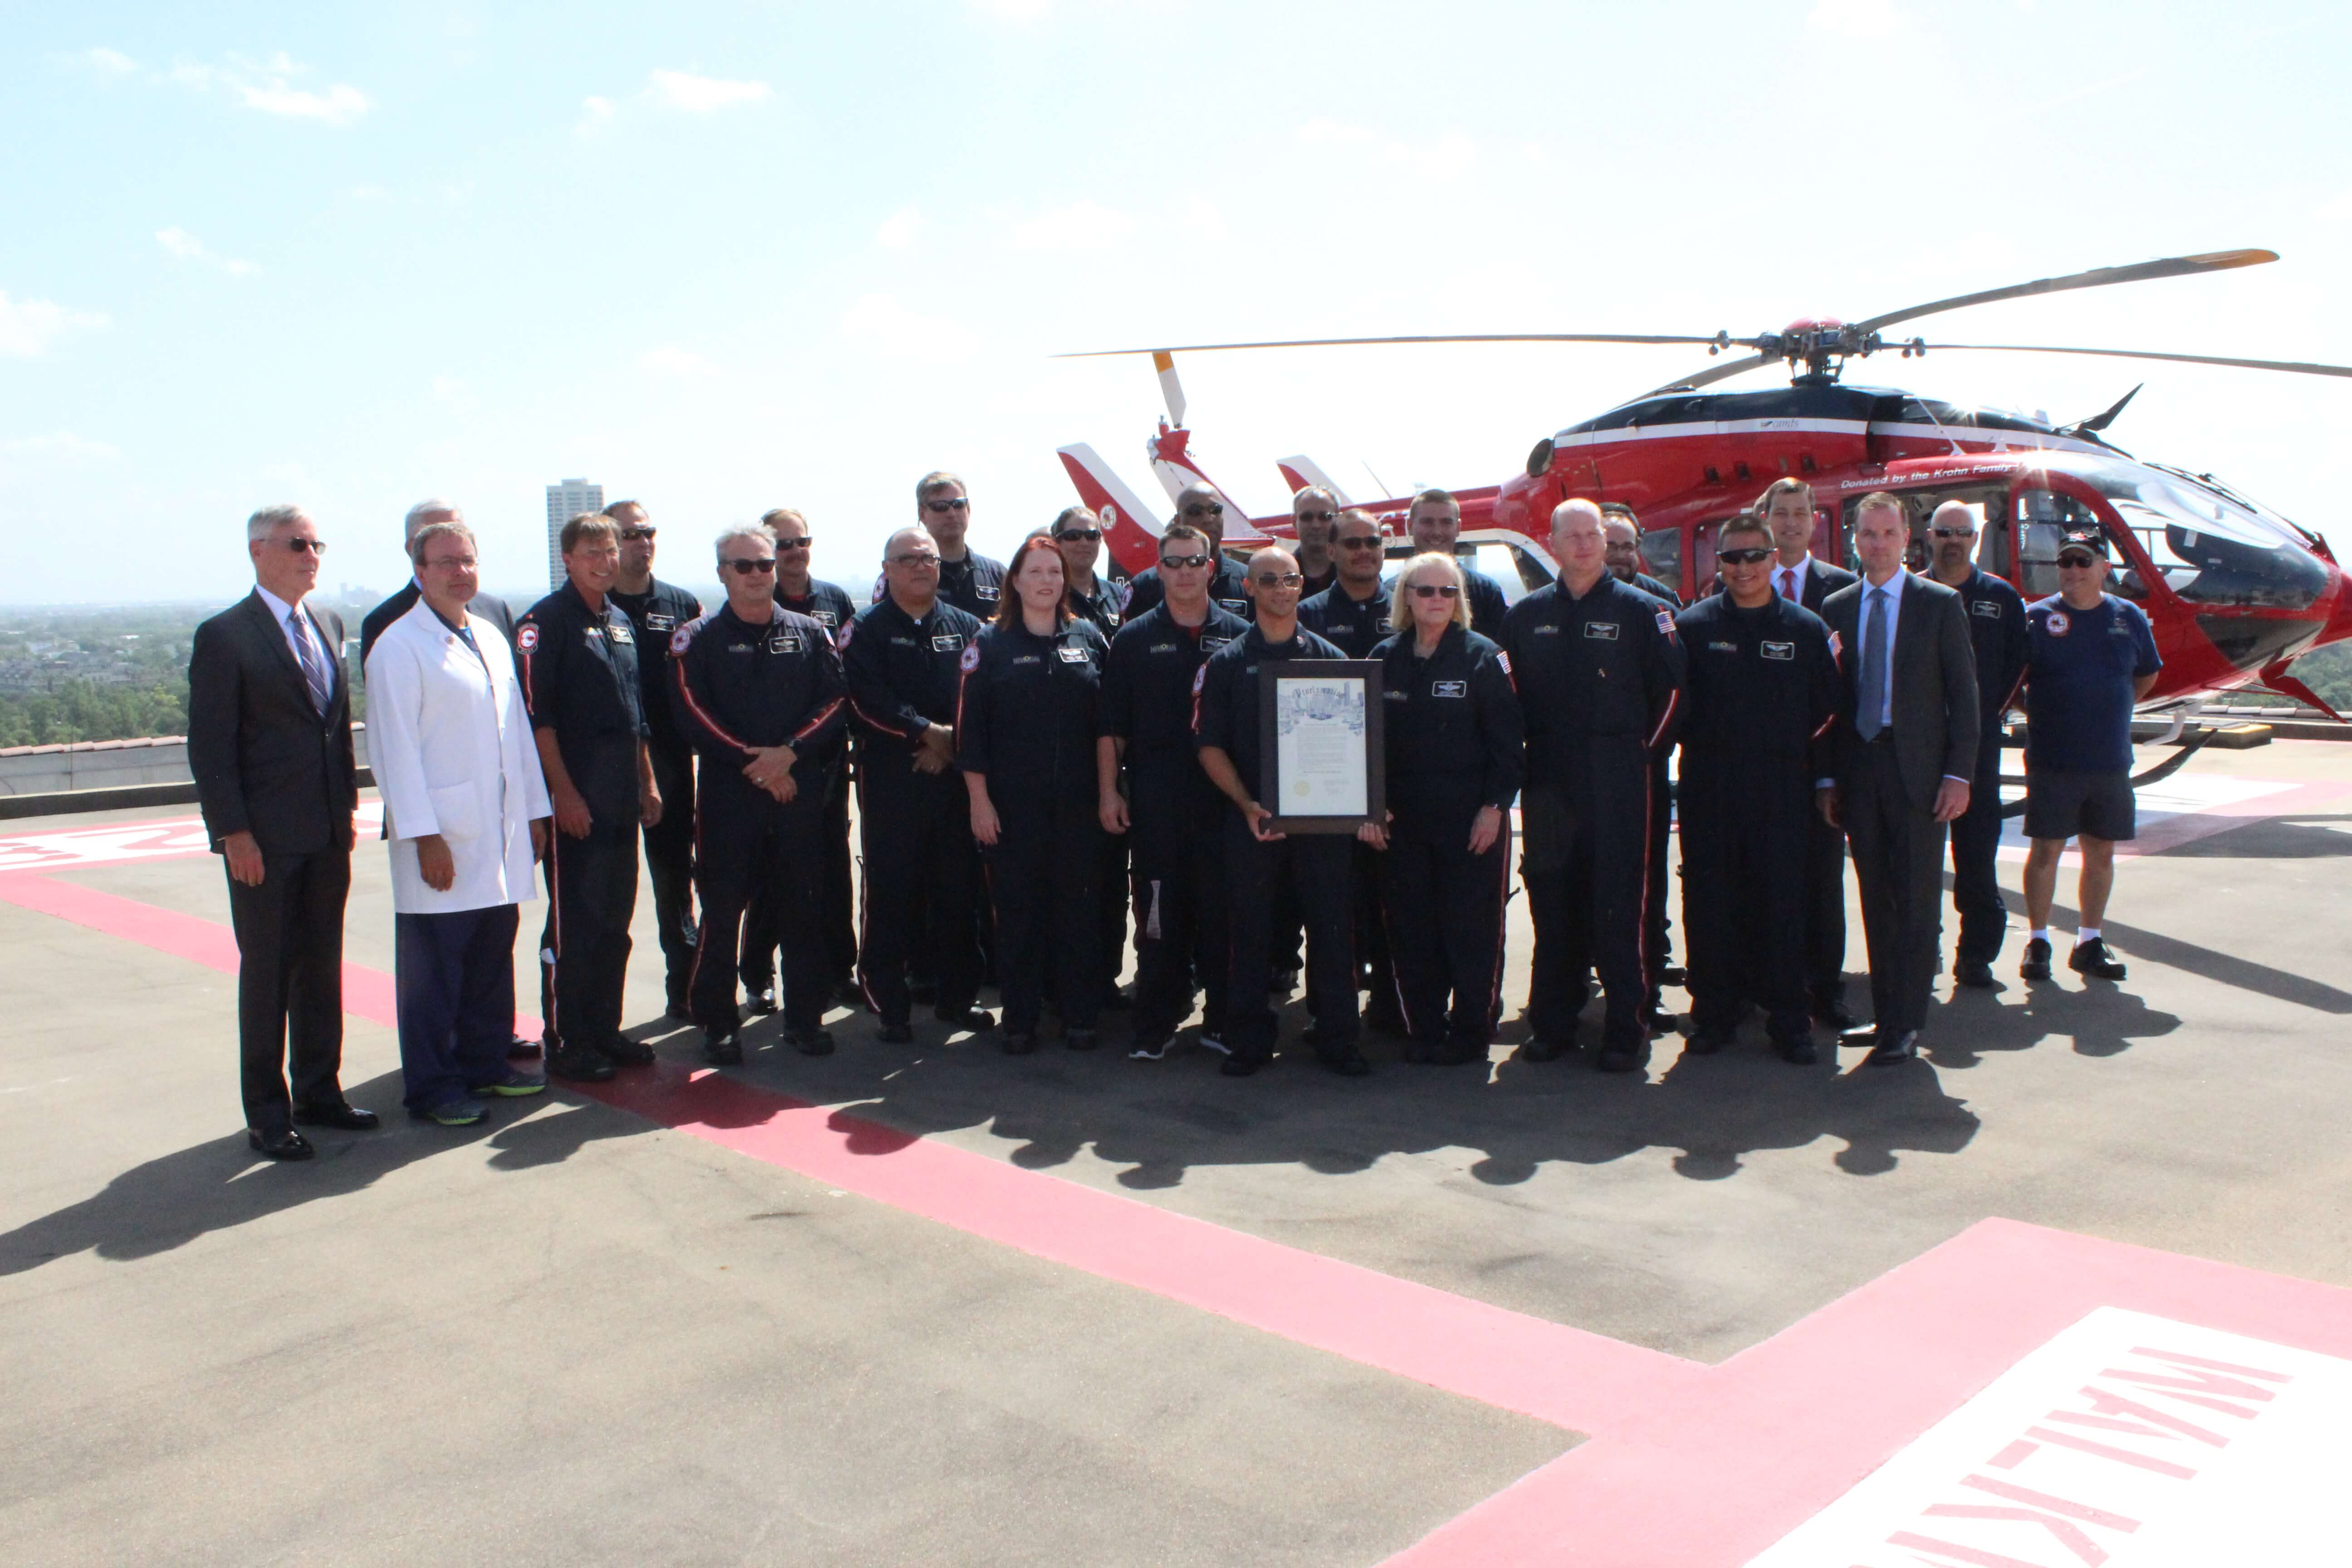 Memorial Hermann Life Flight team poses infront of one of their helicopters